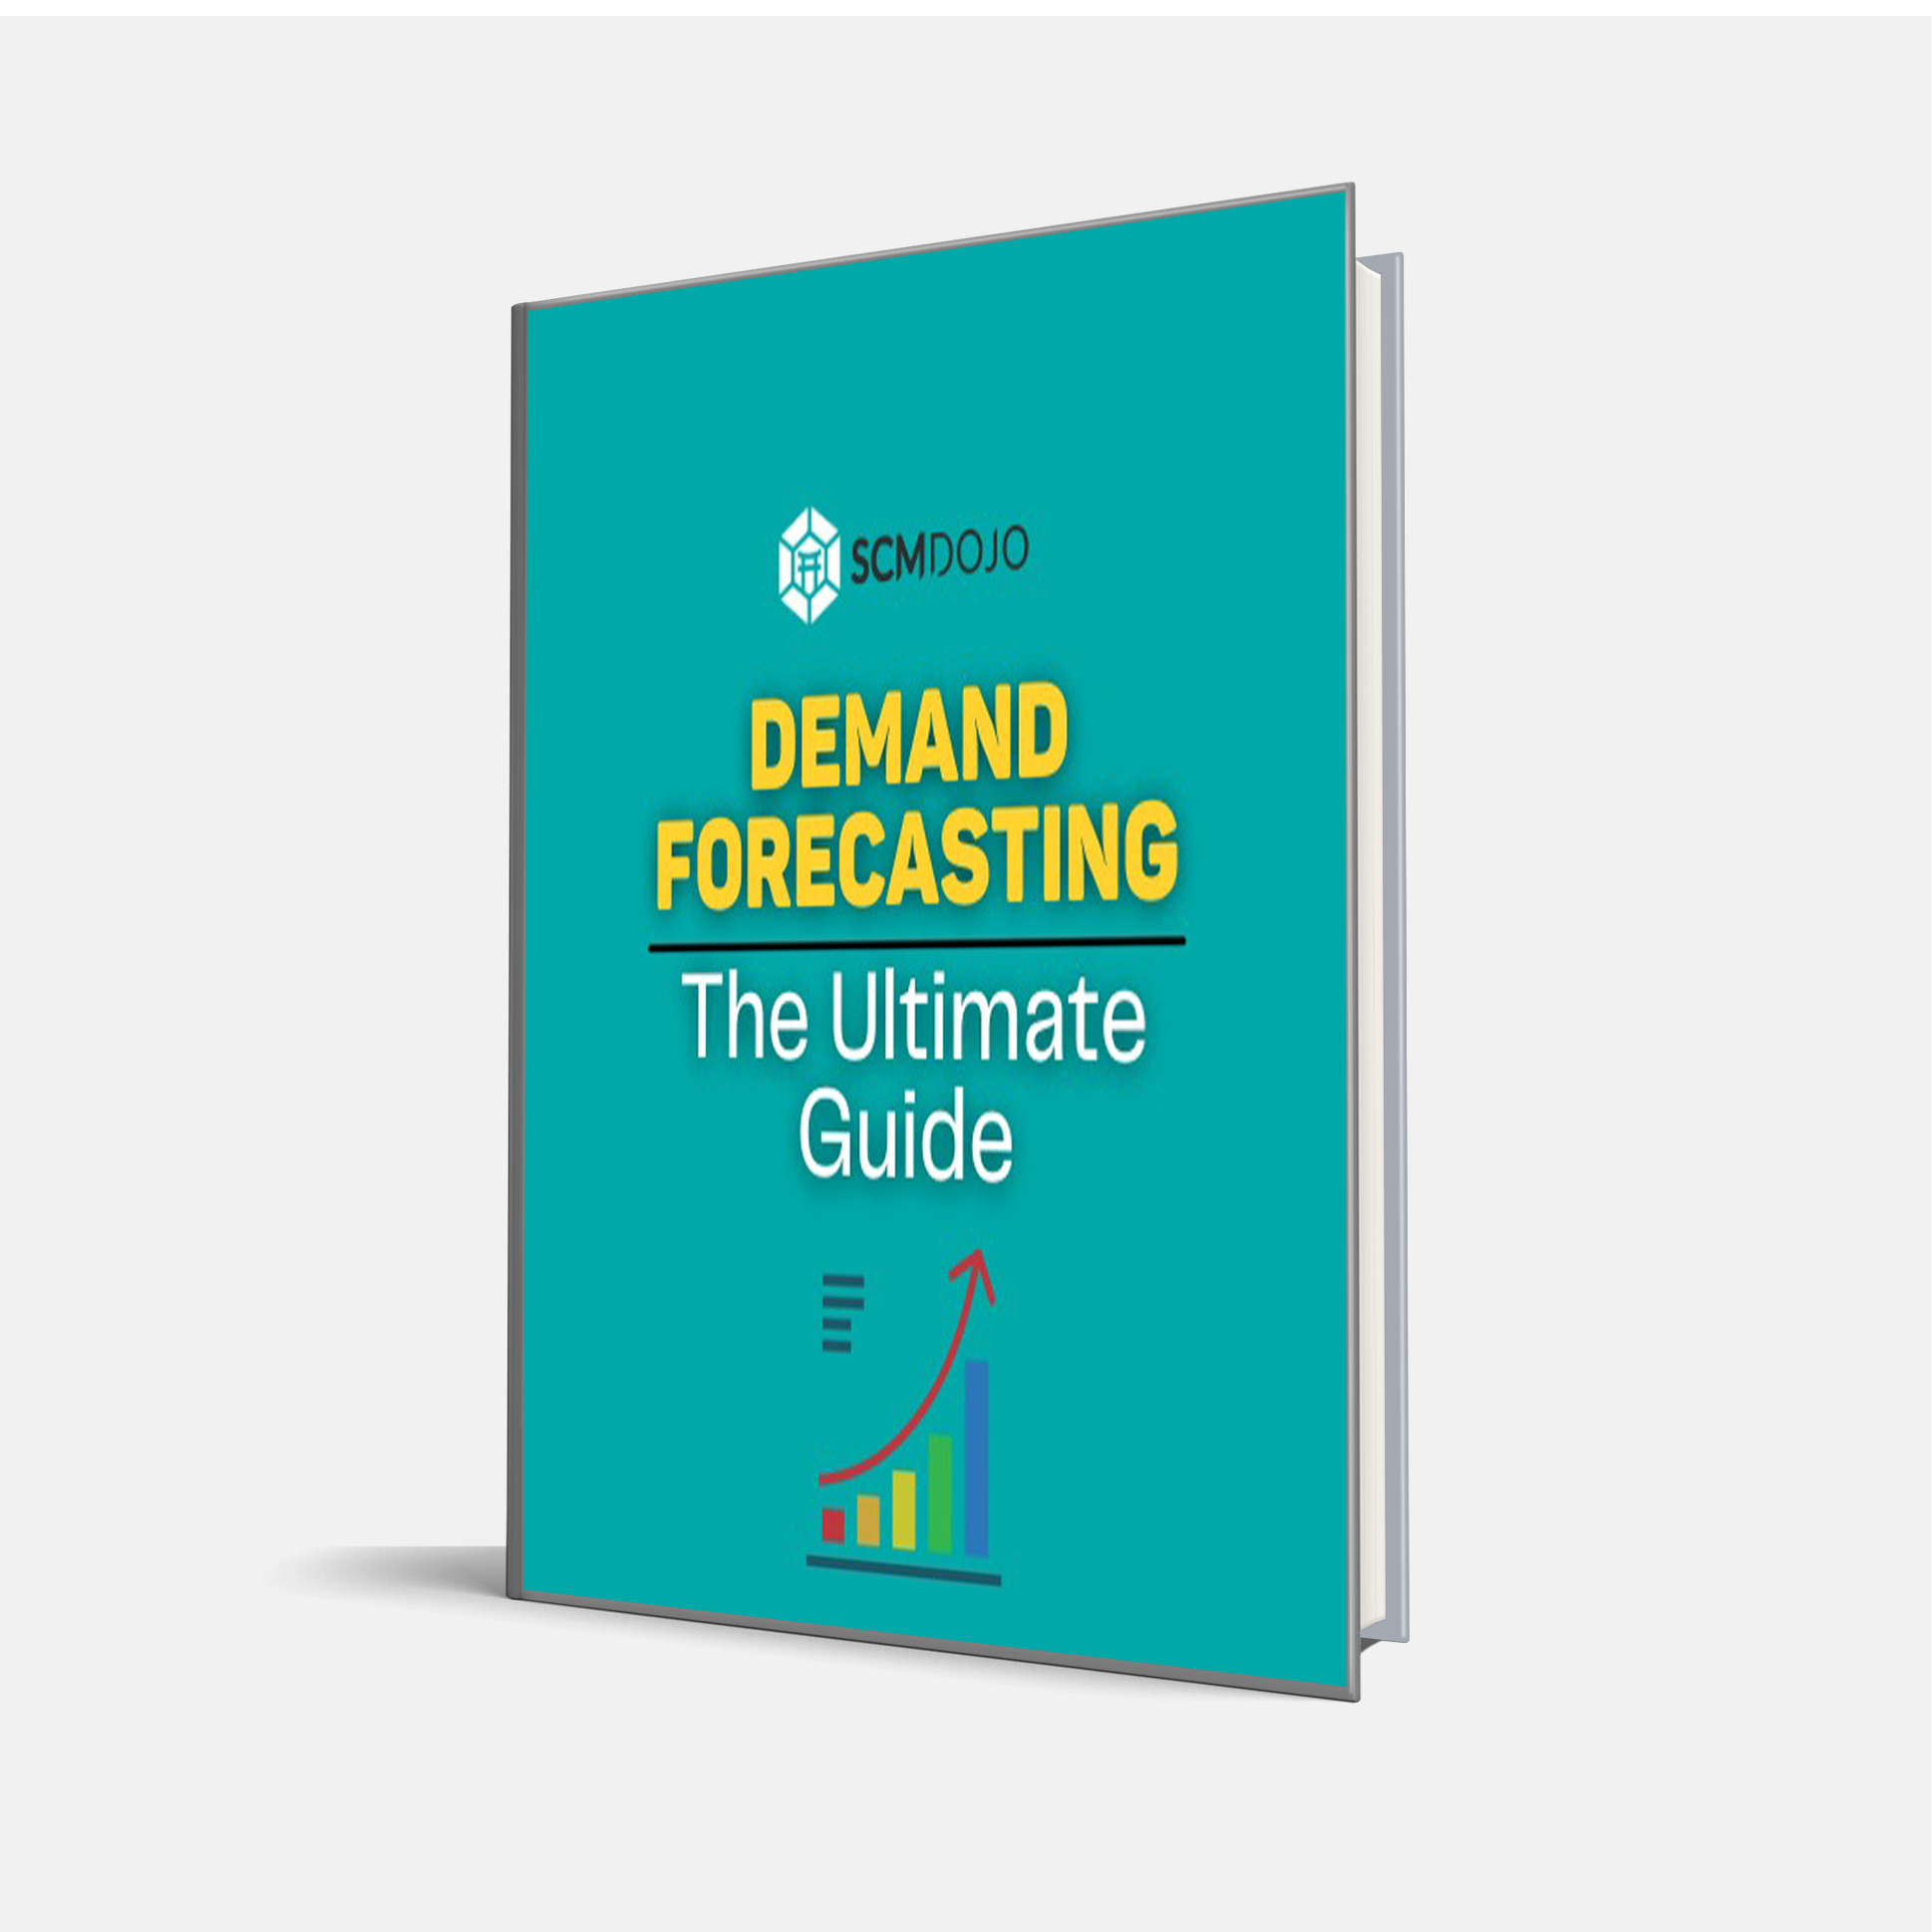 Demand Forecasting Methods The Ultimate Guide